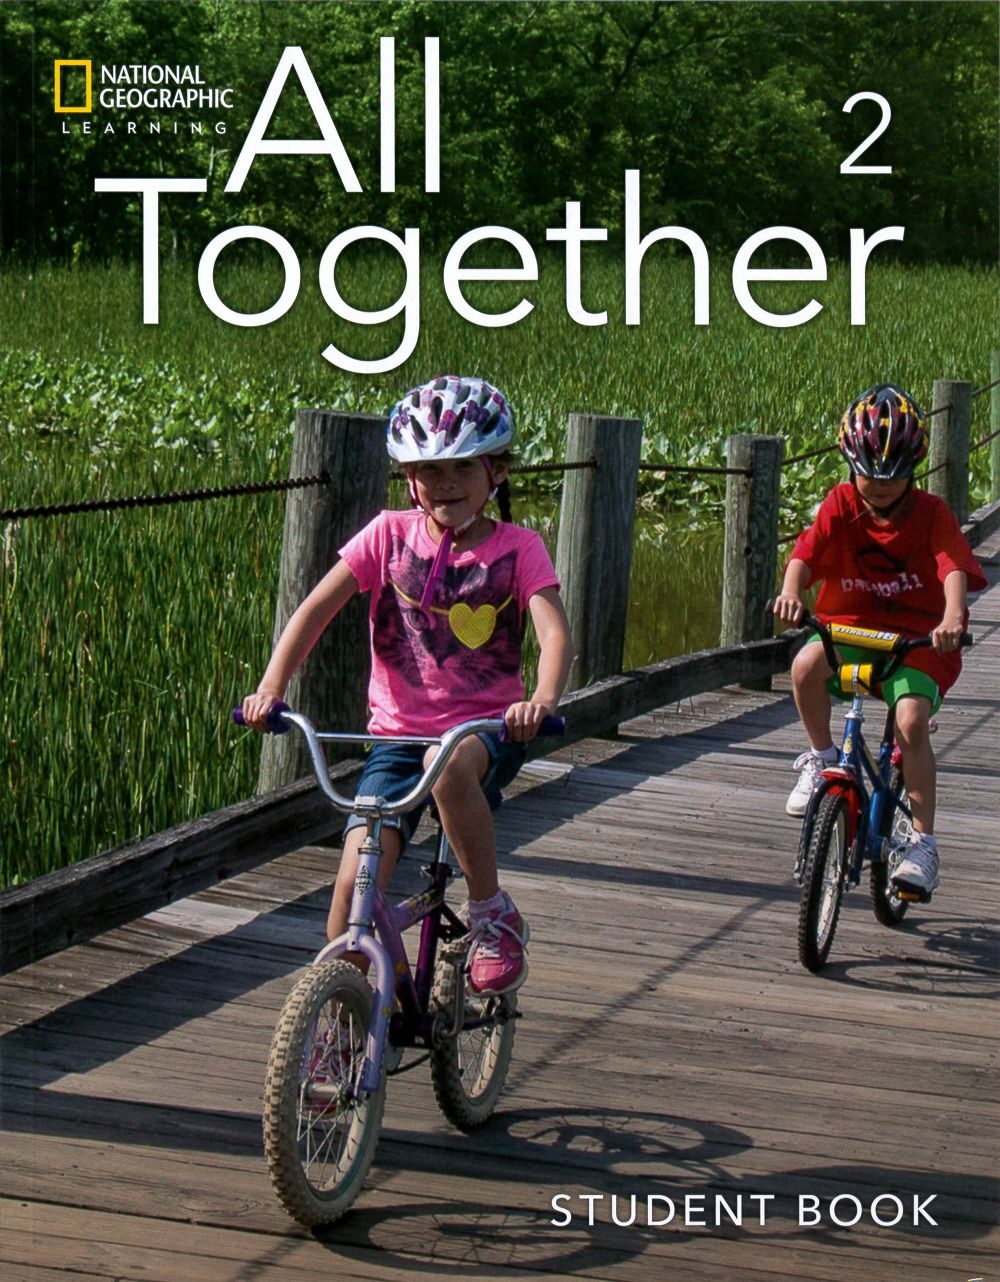 All Together 2 Student Book with Audio CDs/2片